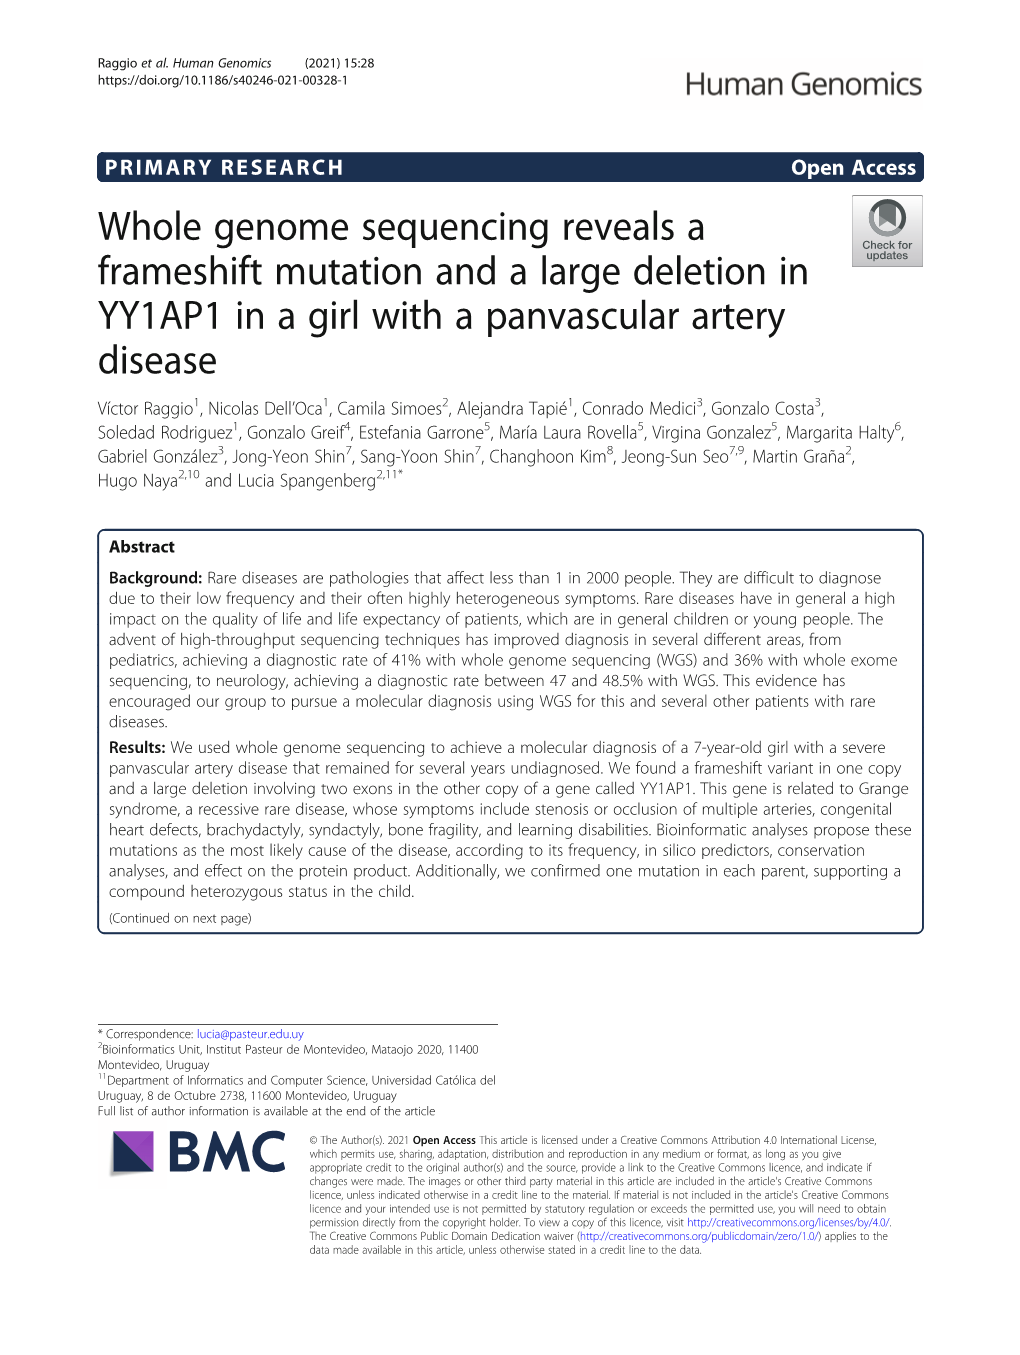 Whole Genome Sequencing Reveals a Frameshift Mutation and a Large